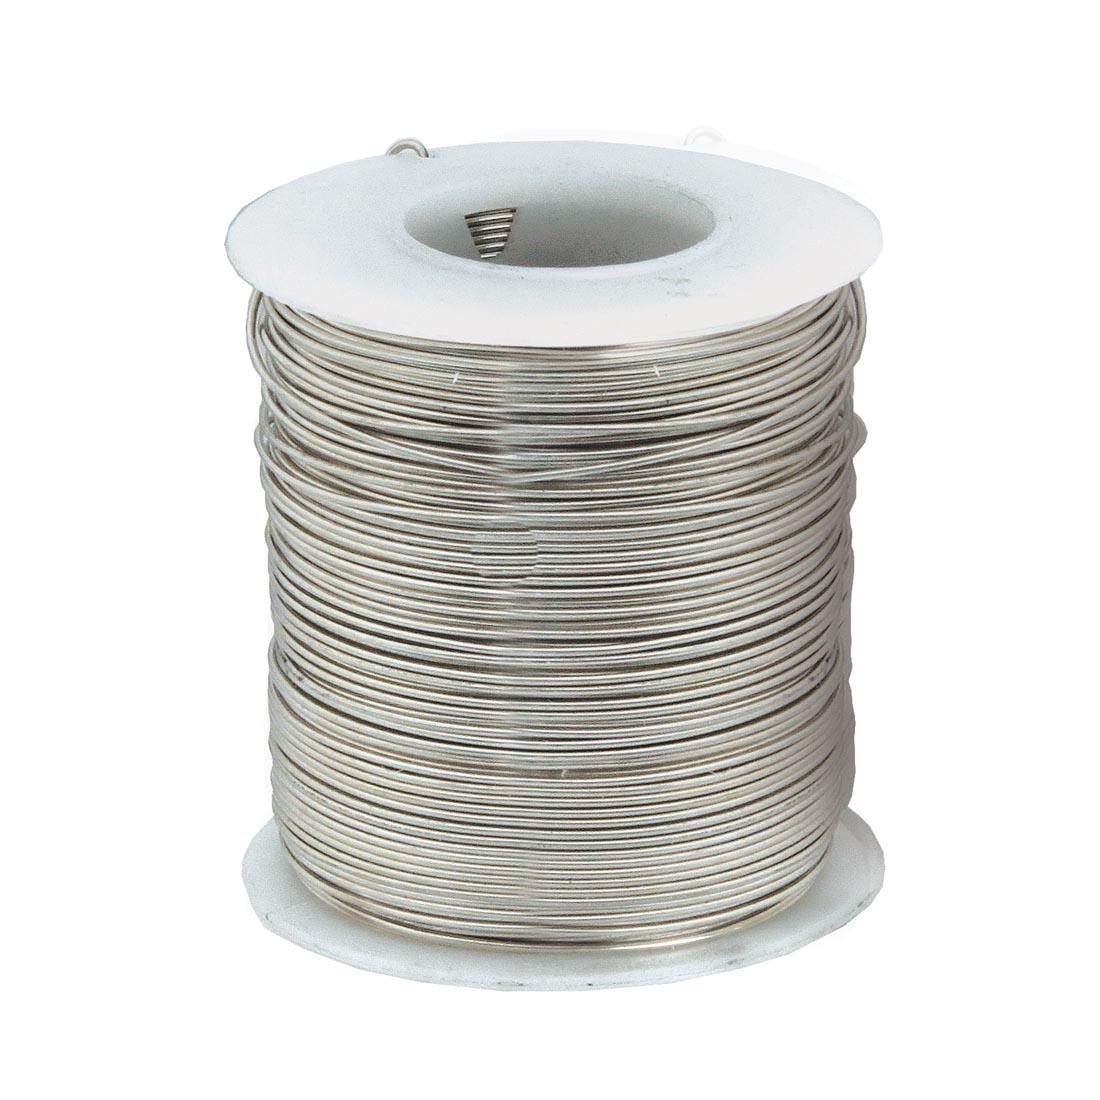 Spool of Parawire Tinned Copper Wire